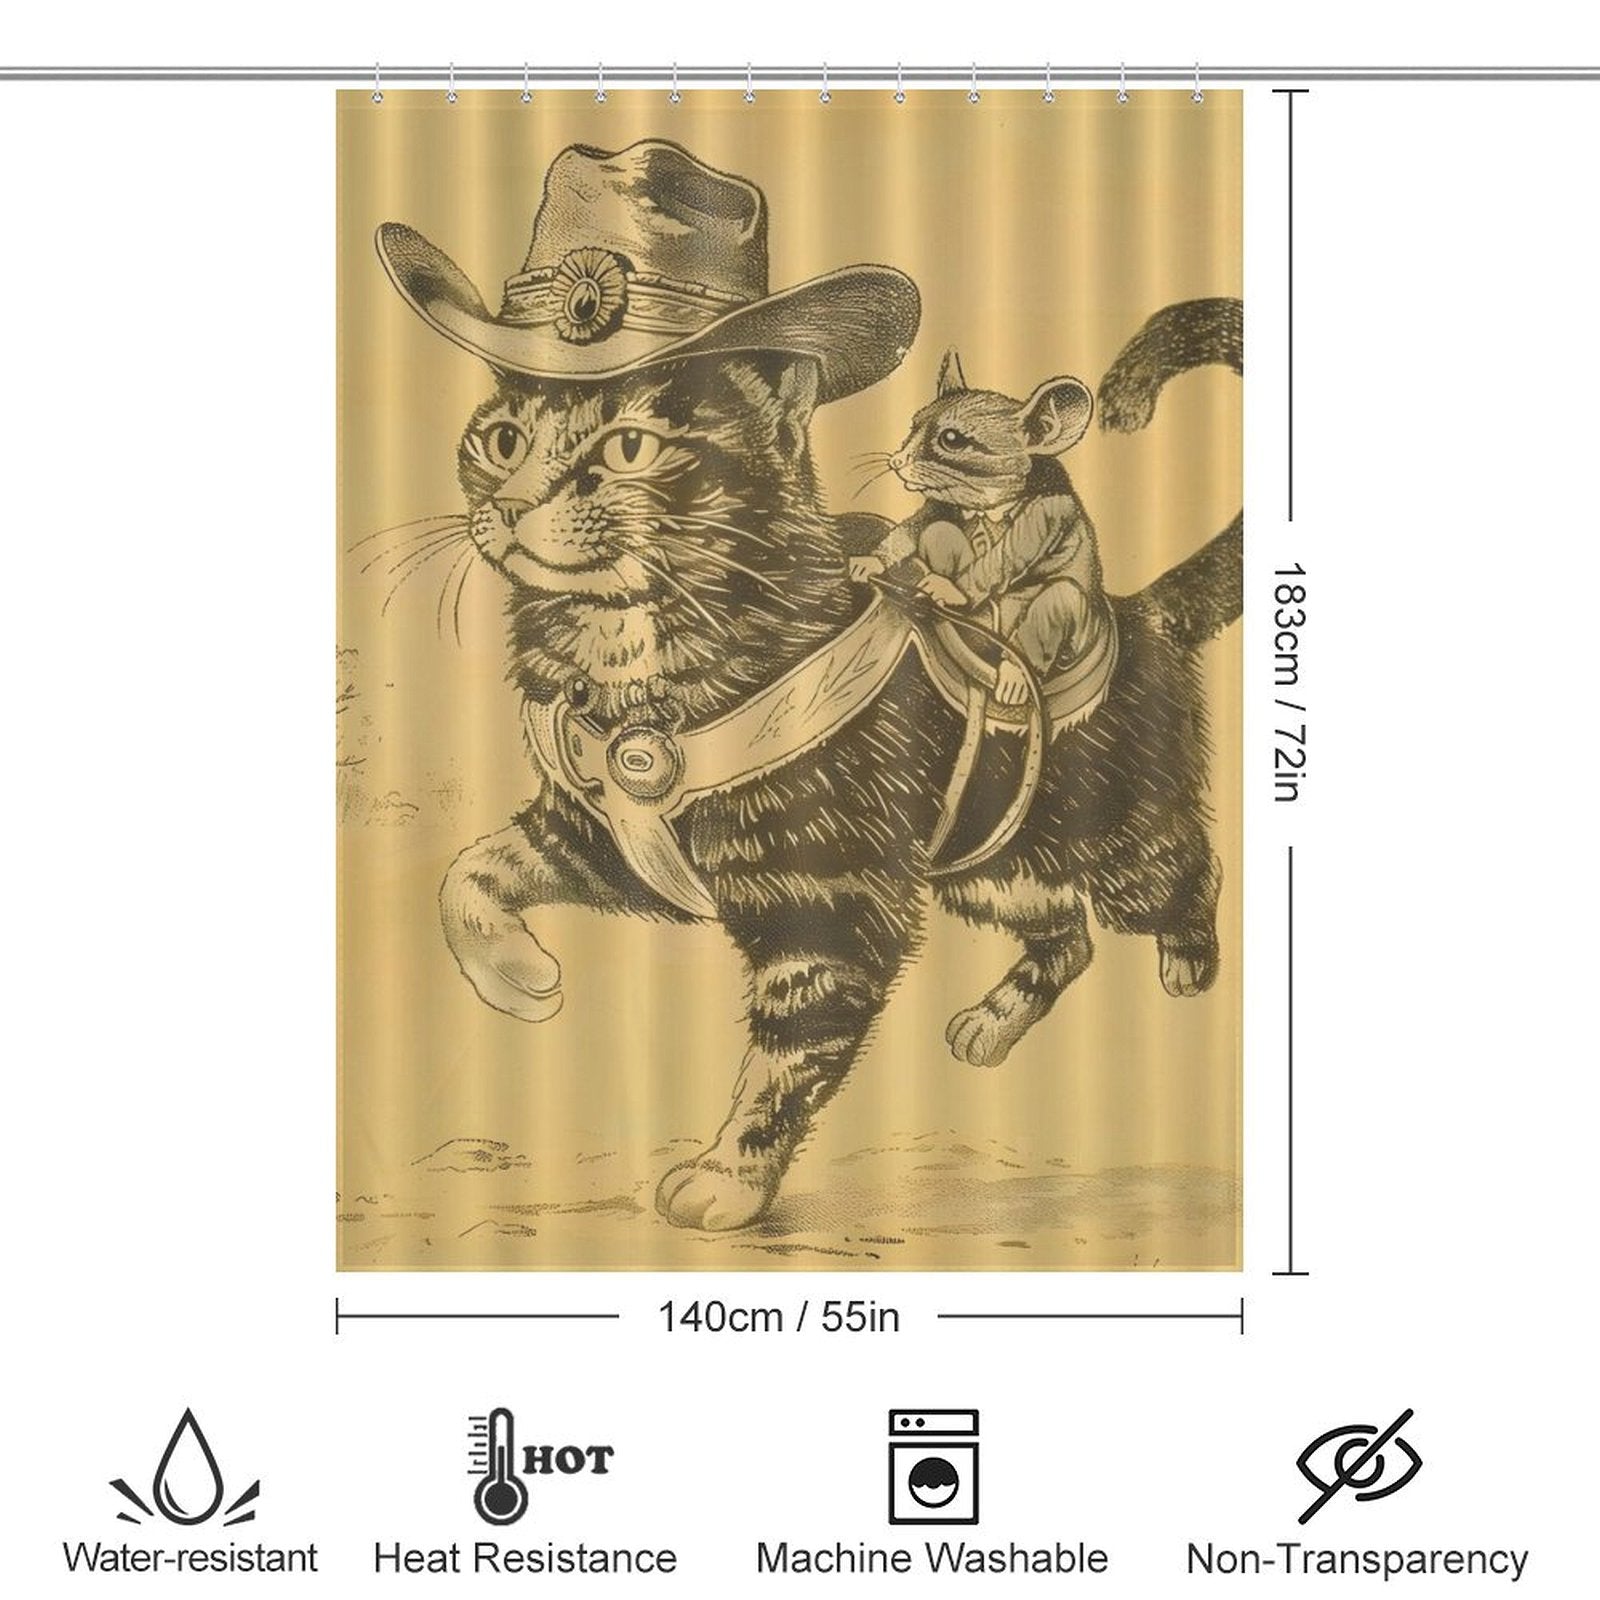 A unique **Funny Cool Mouse Riding Cat Shower Curtain Shower Curtain-Cottoncat** featuring a cat in a hat and boots, with a mouse riding on its back. This funny bathroom decor from **Cotton Cat** is labeled as water-resistant, heat-resistant, machine washable, and non-transparent.